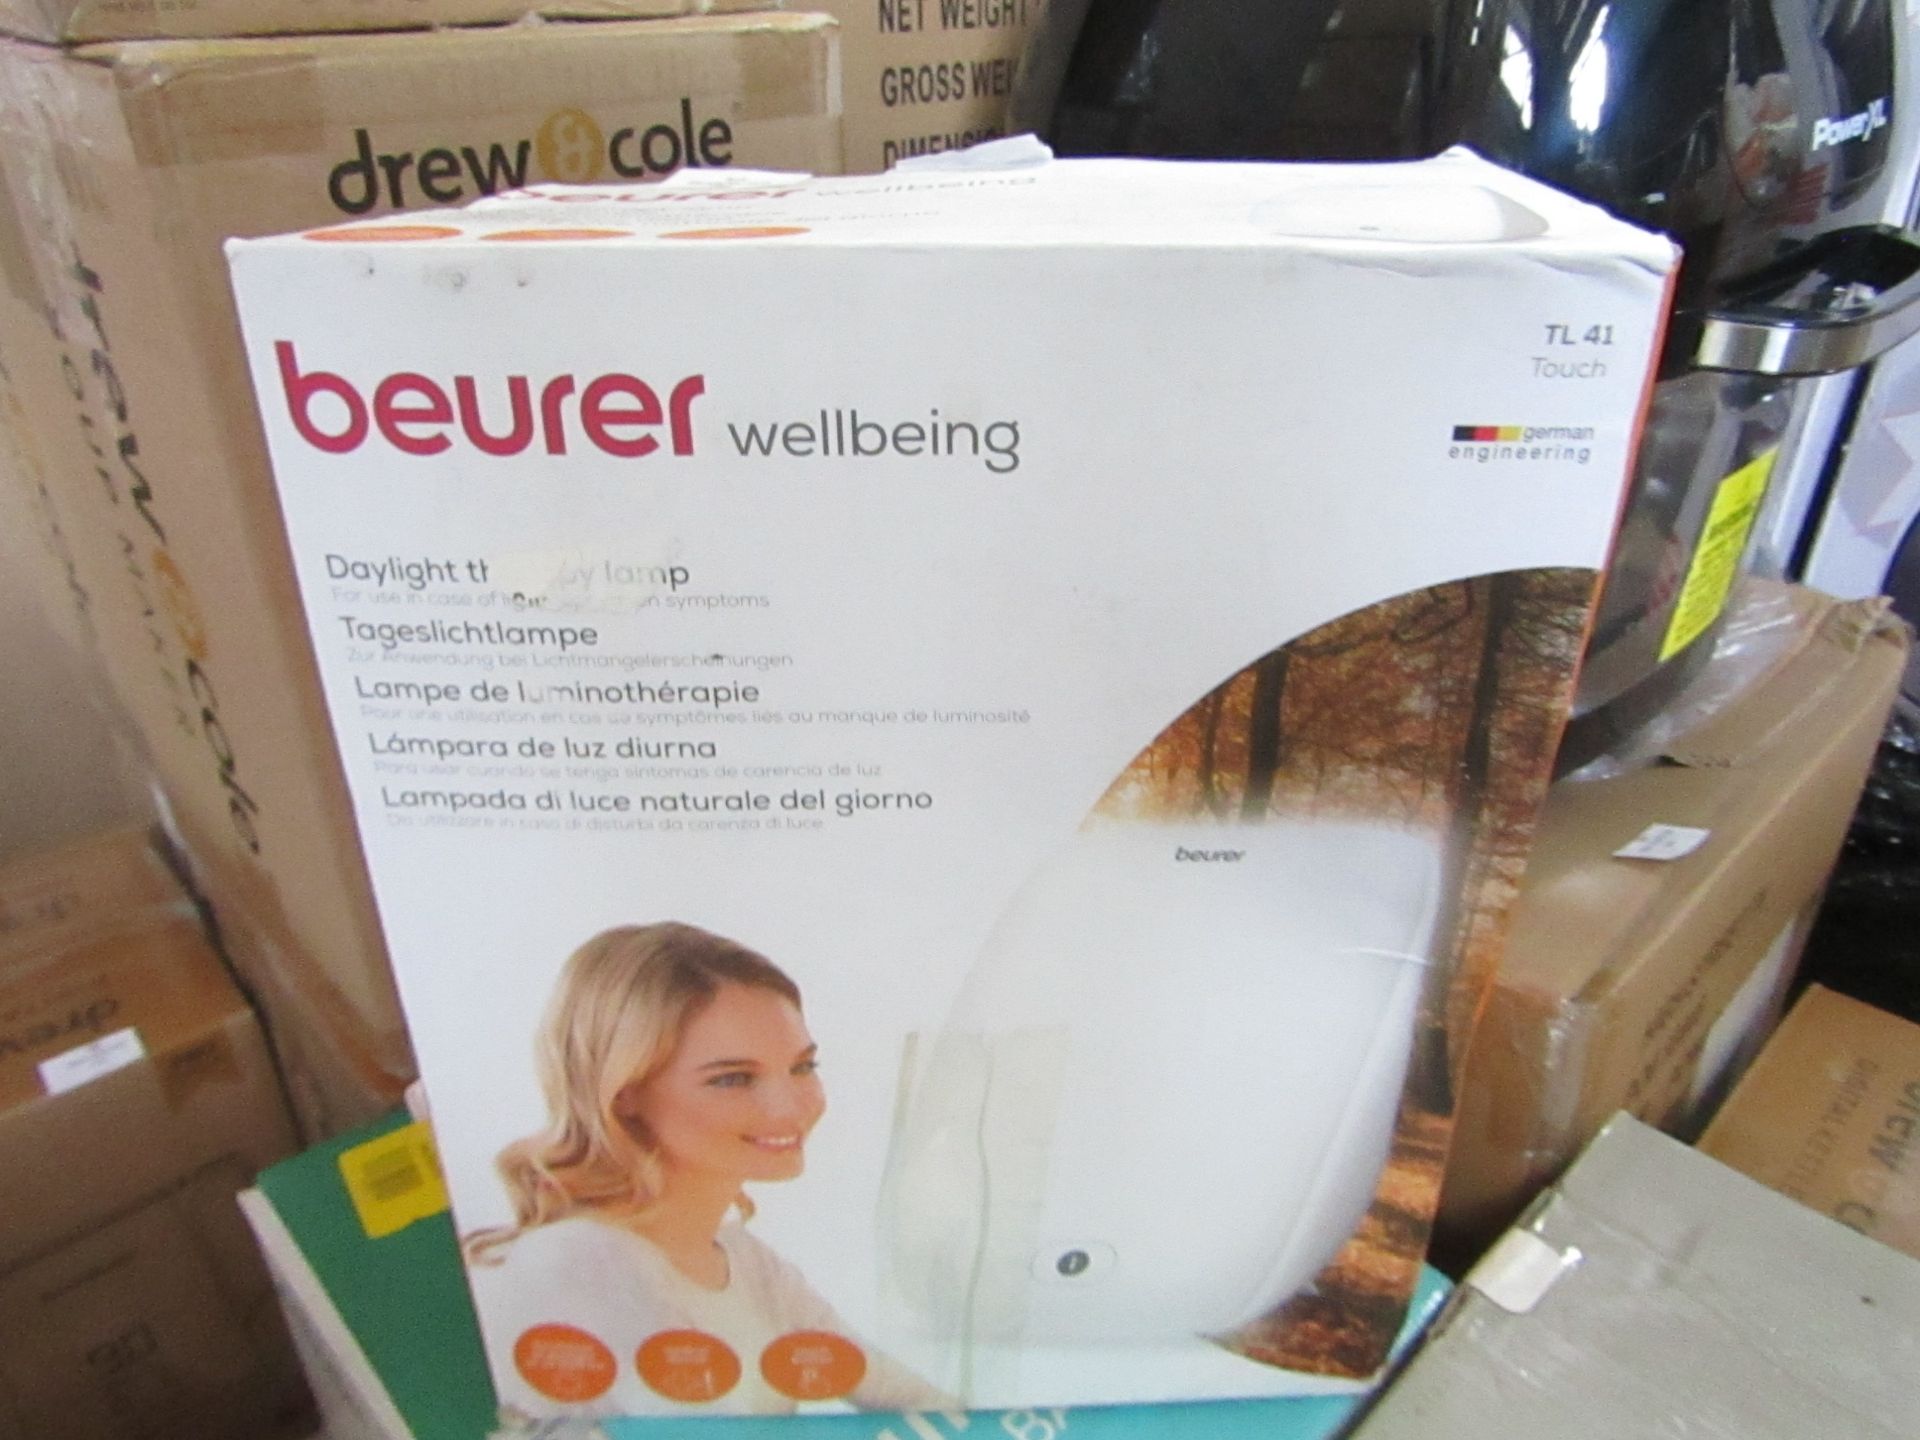 1x Beurer Wellbeing Daylight Therapy Lamps TL41 - These items are graded B